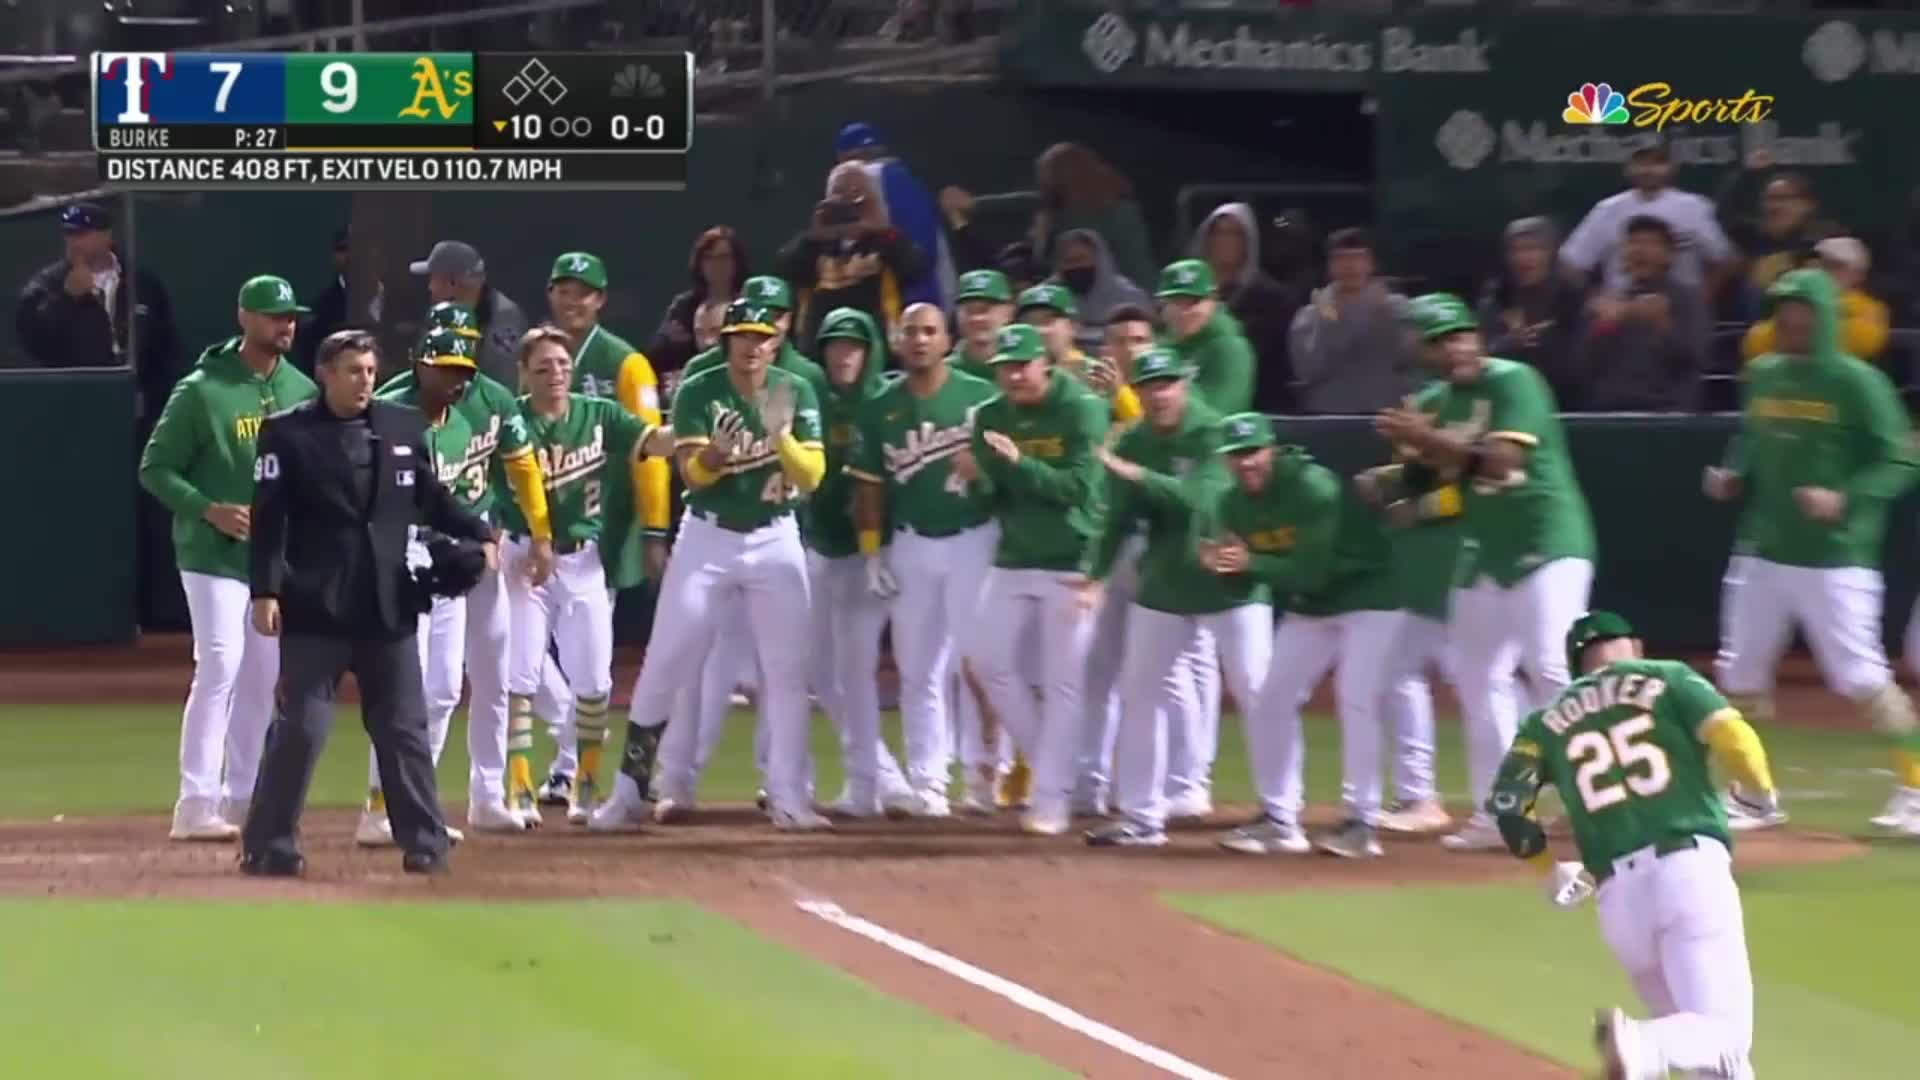 The Kelly Green jerseys are undefeated - Oakland Athletics